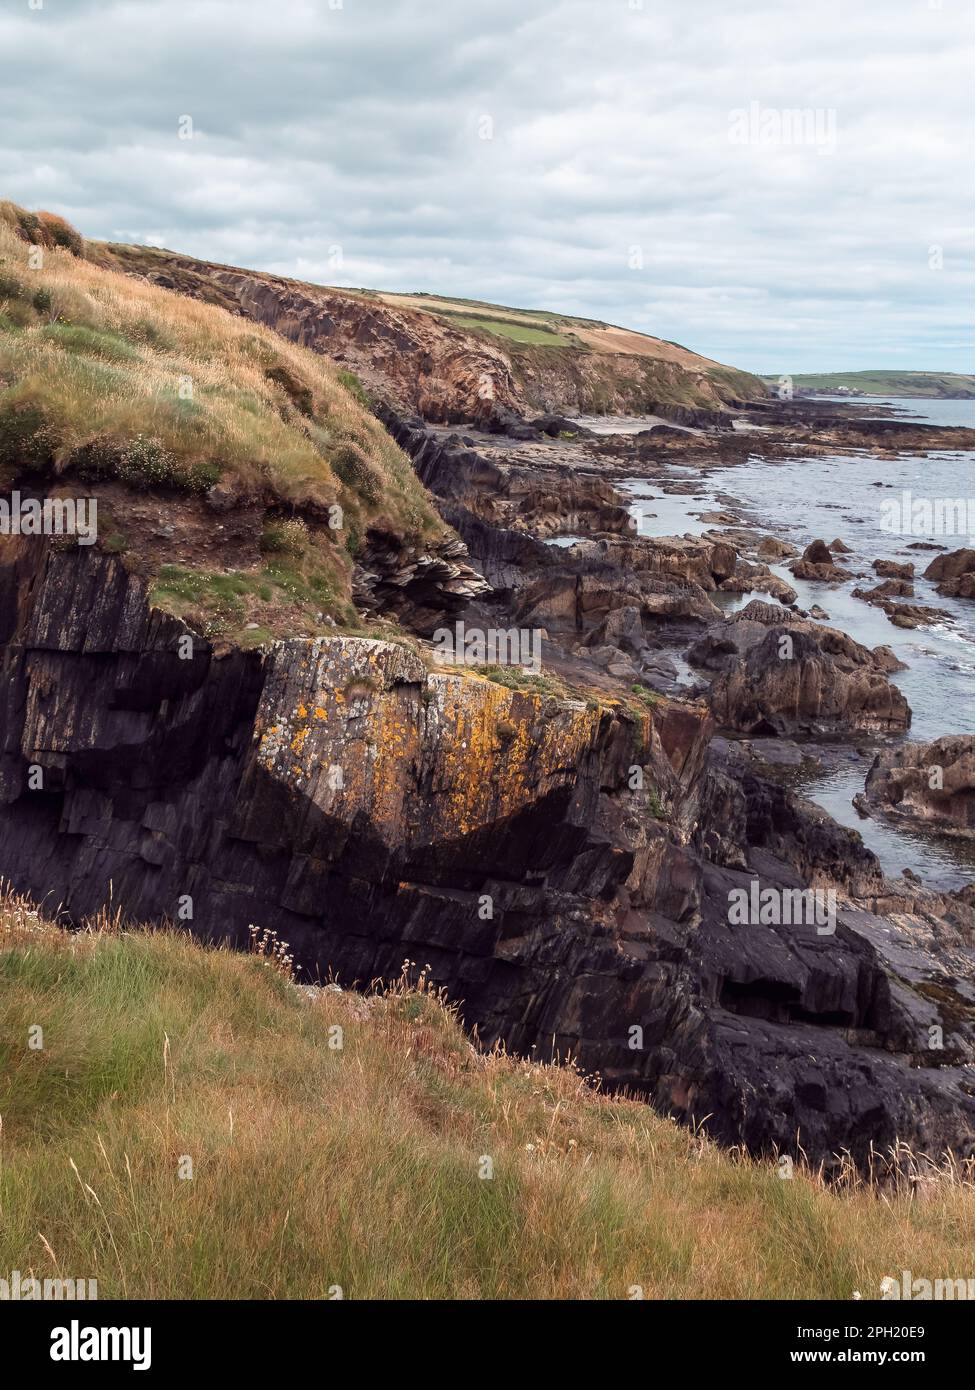 Picturesque landscape. Wild vegetation grows on stony soil. Cloudy sky over the ocean coast. Views on the wild Atlantic way, hills under clouds. Stock Photo